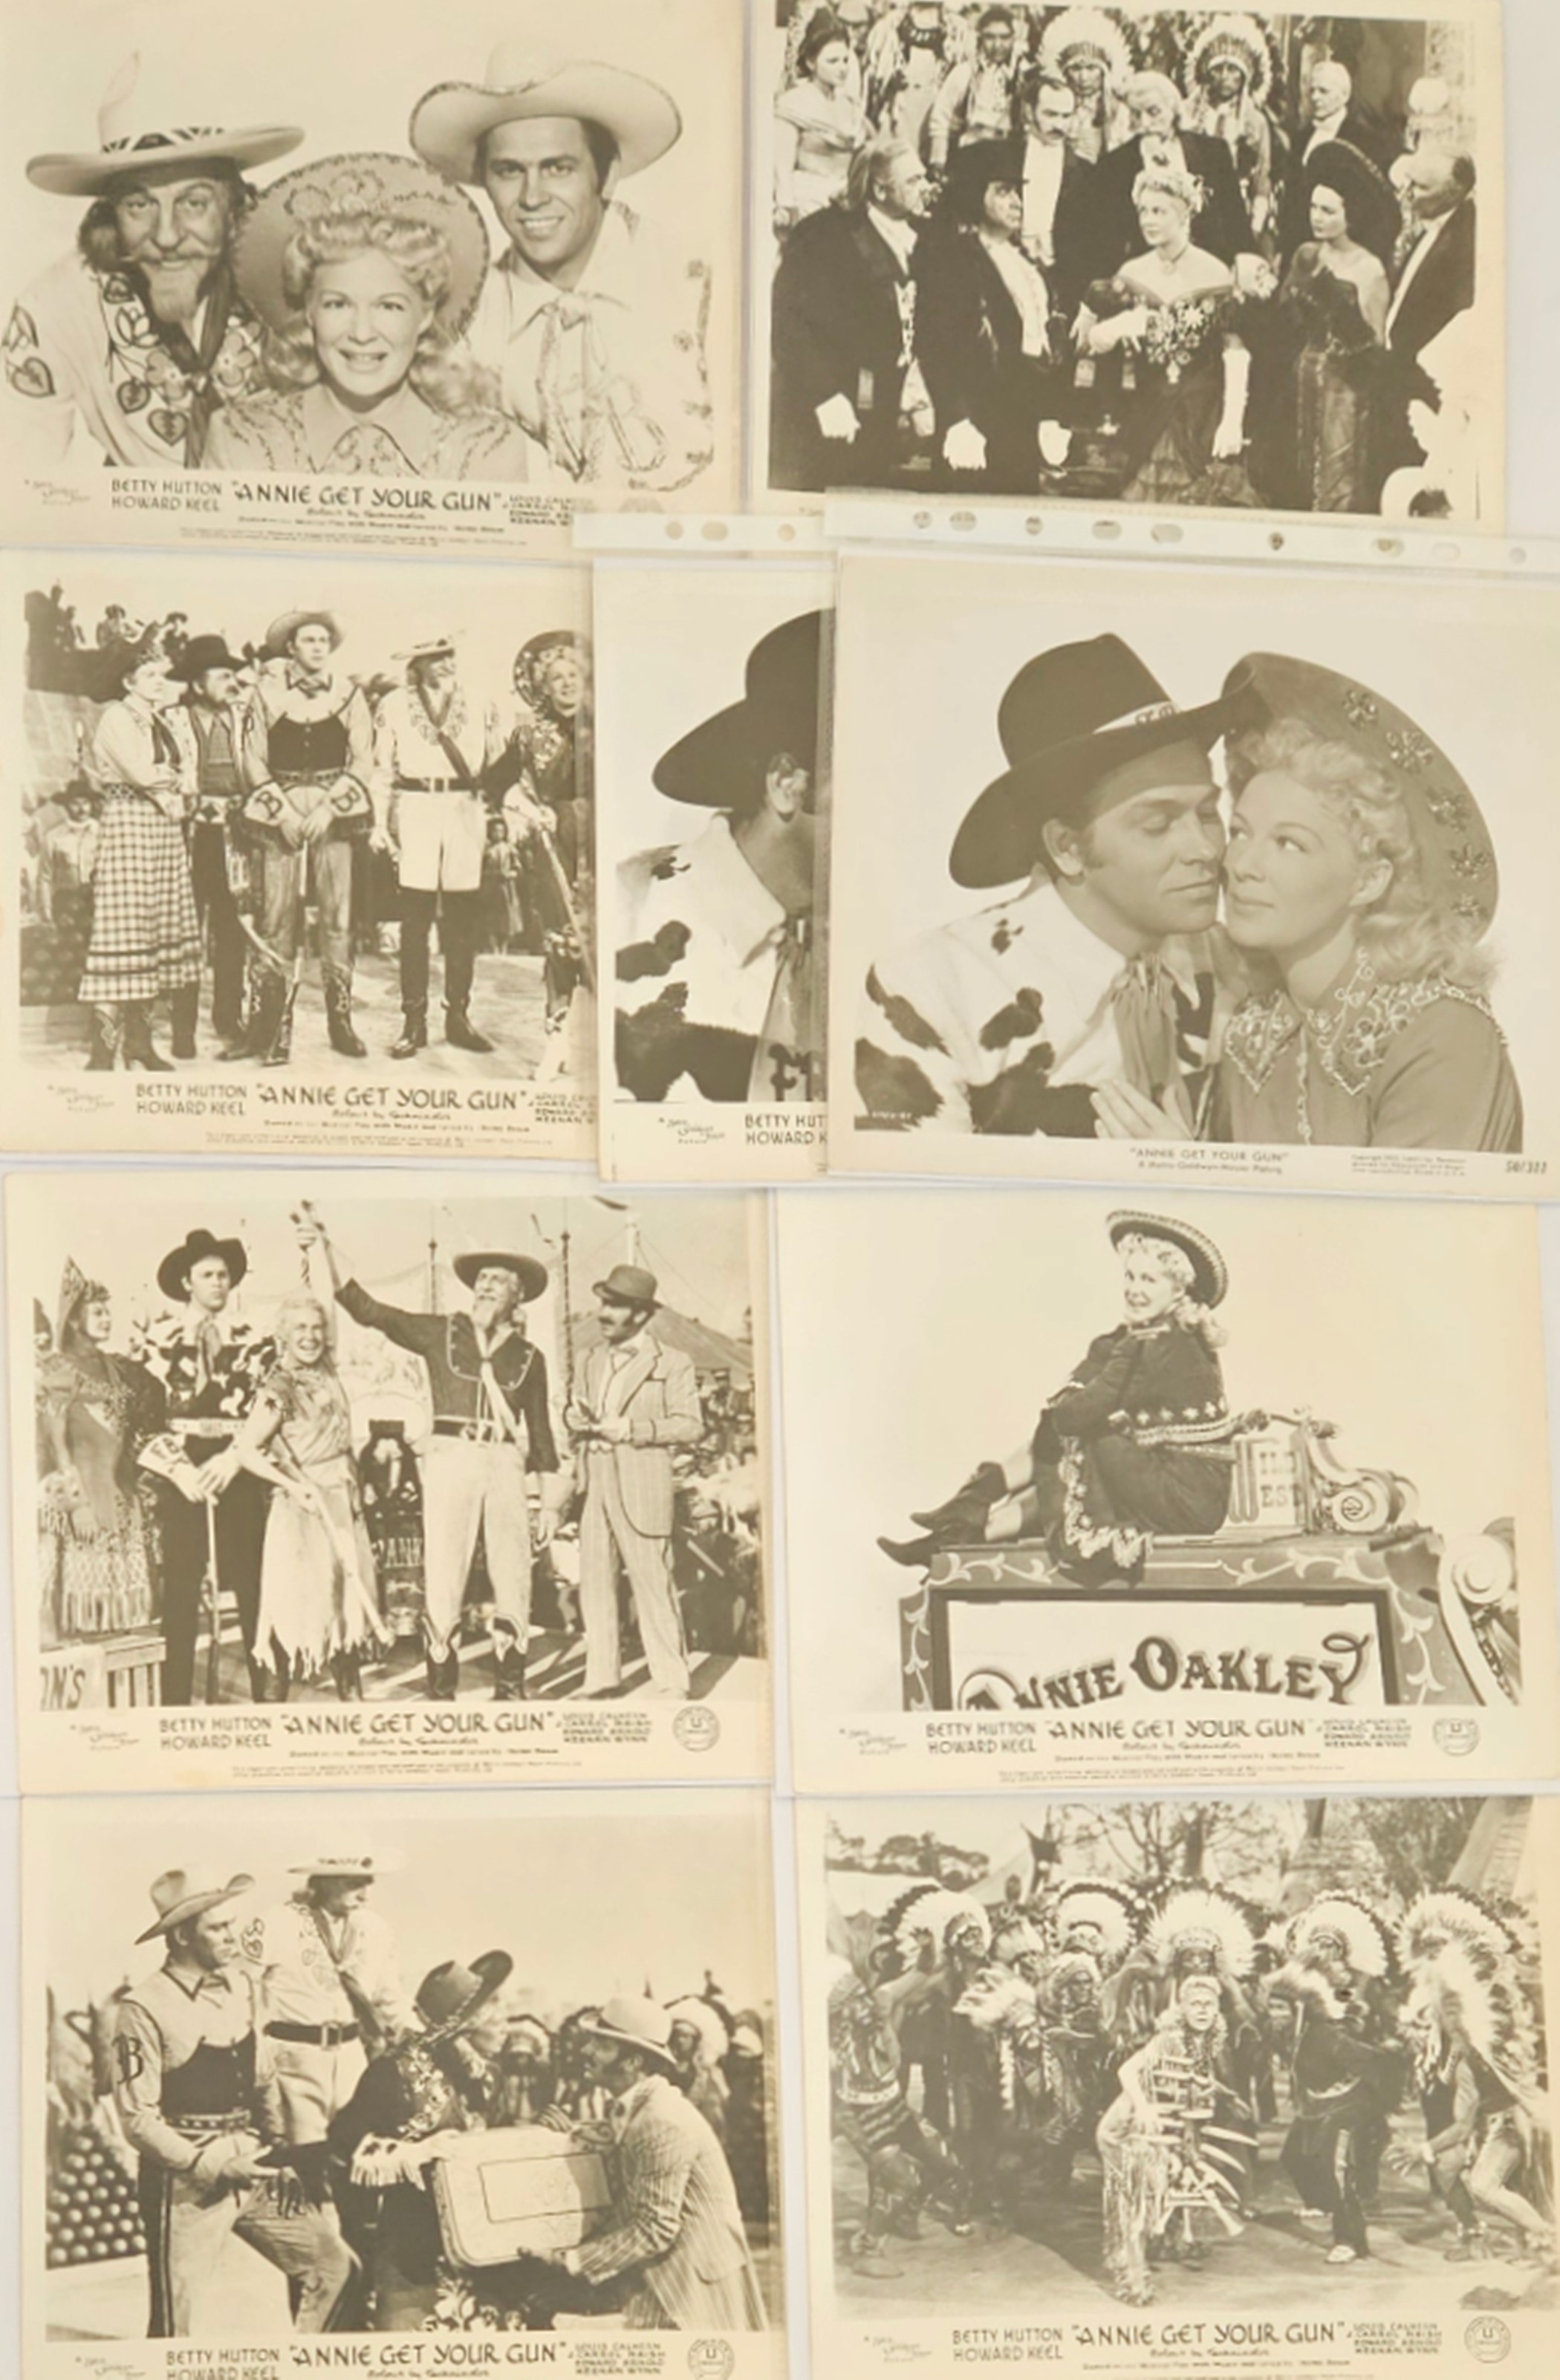 Annie Get Your Gun lobby card collection of 9 unsigned black and white 10x8 inch lobby cards. Good